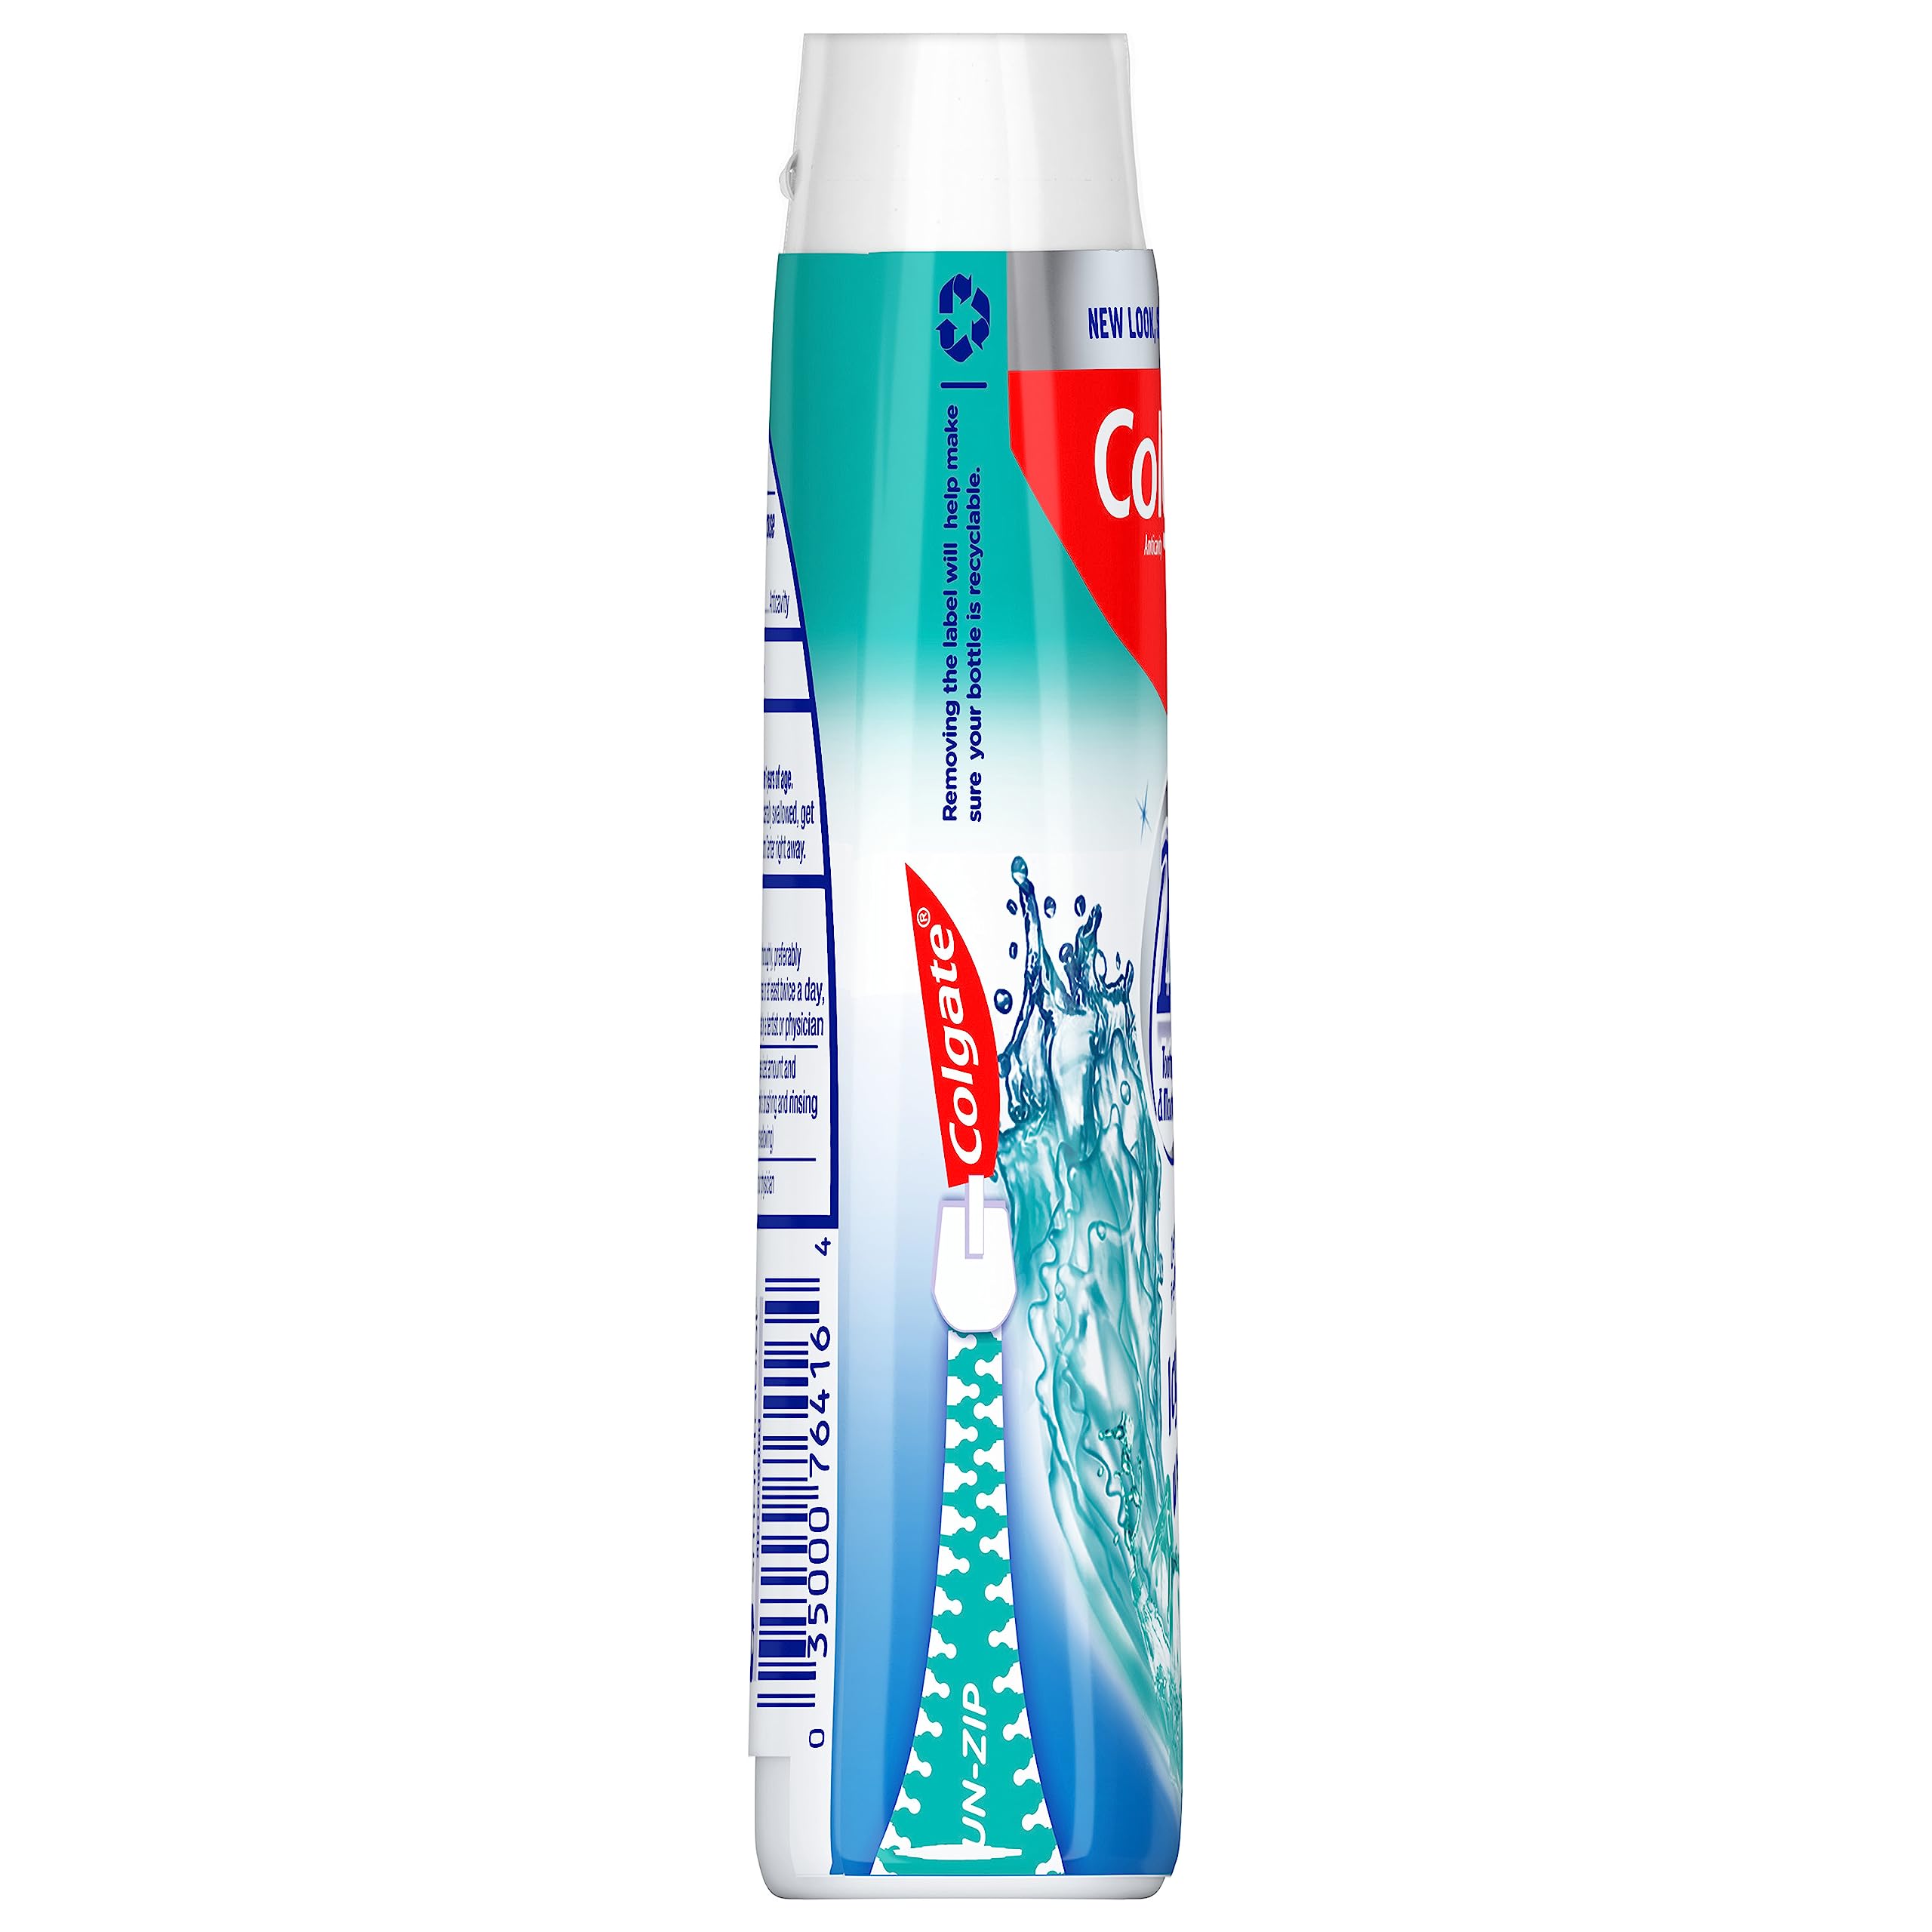 Colgate 2-in-1 Whitening Toothpaste Gel and Mouthwash, Icy Blast, 4.6 Ounce